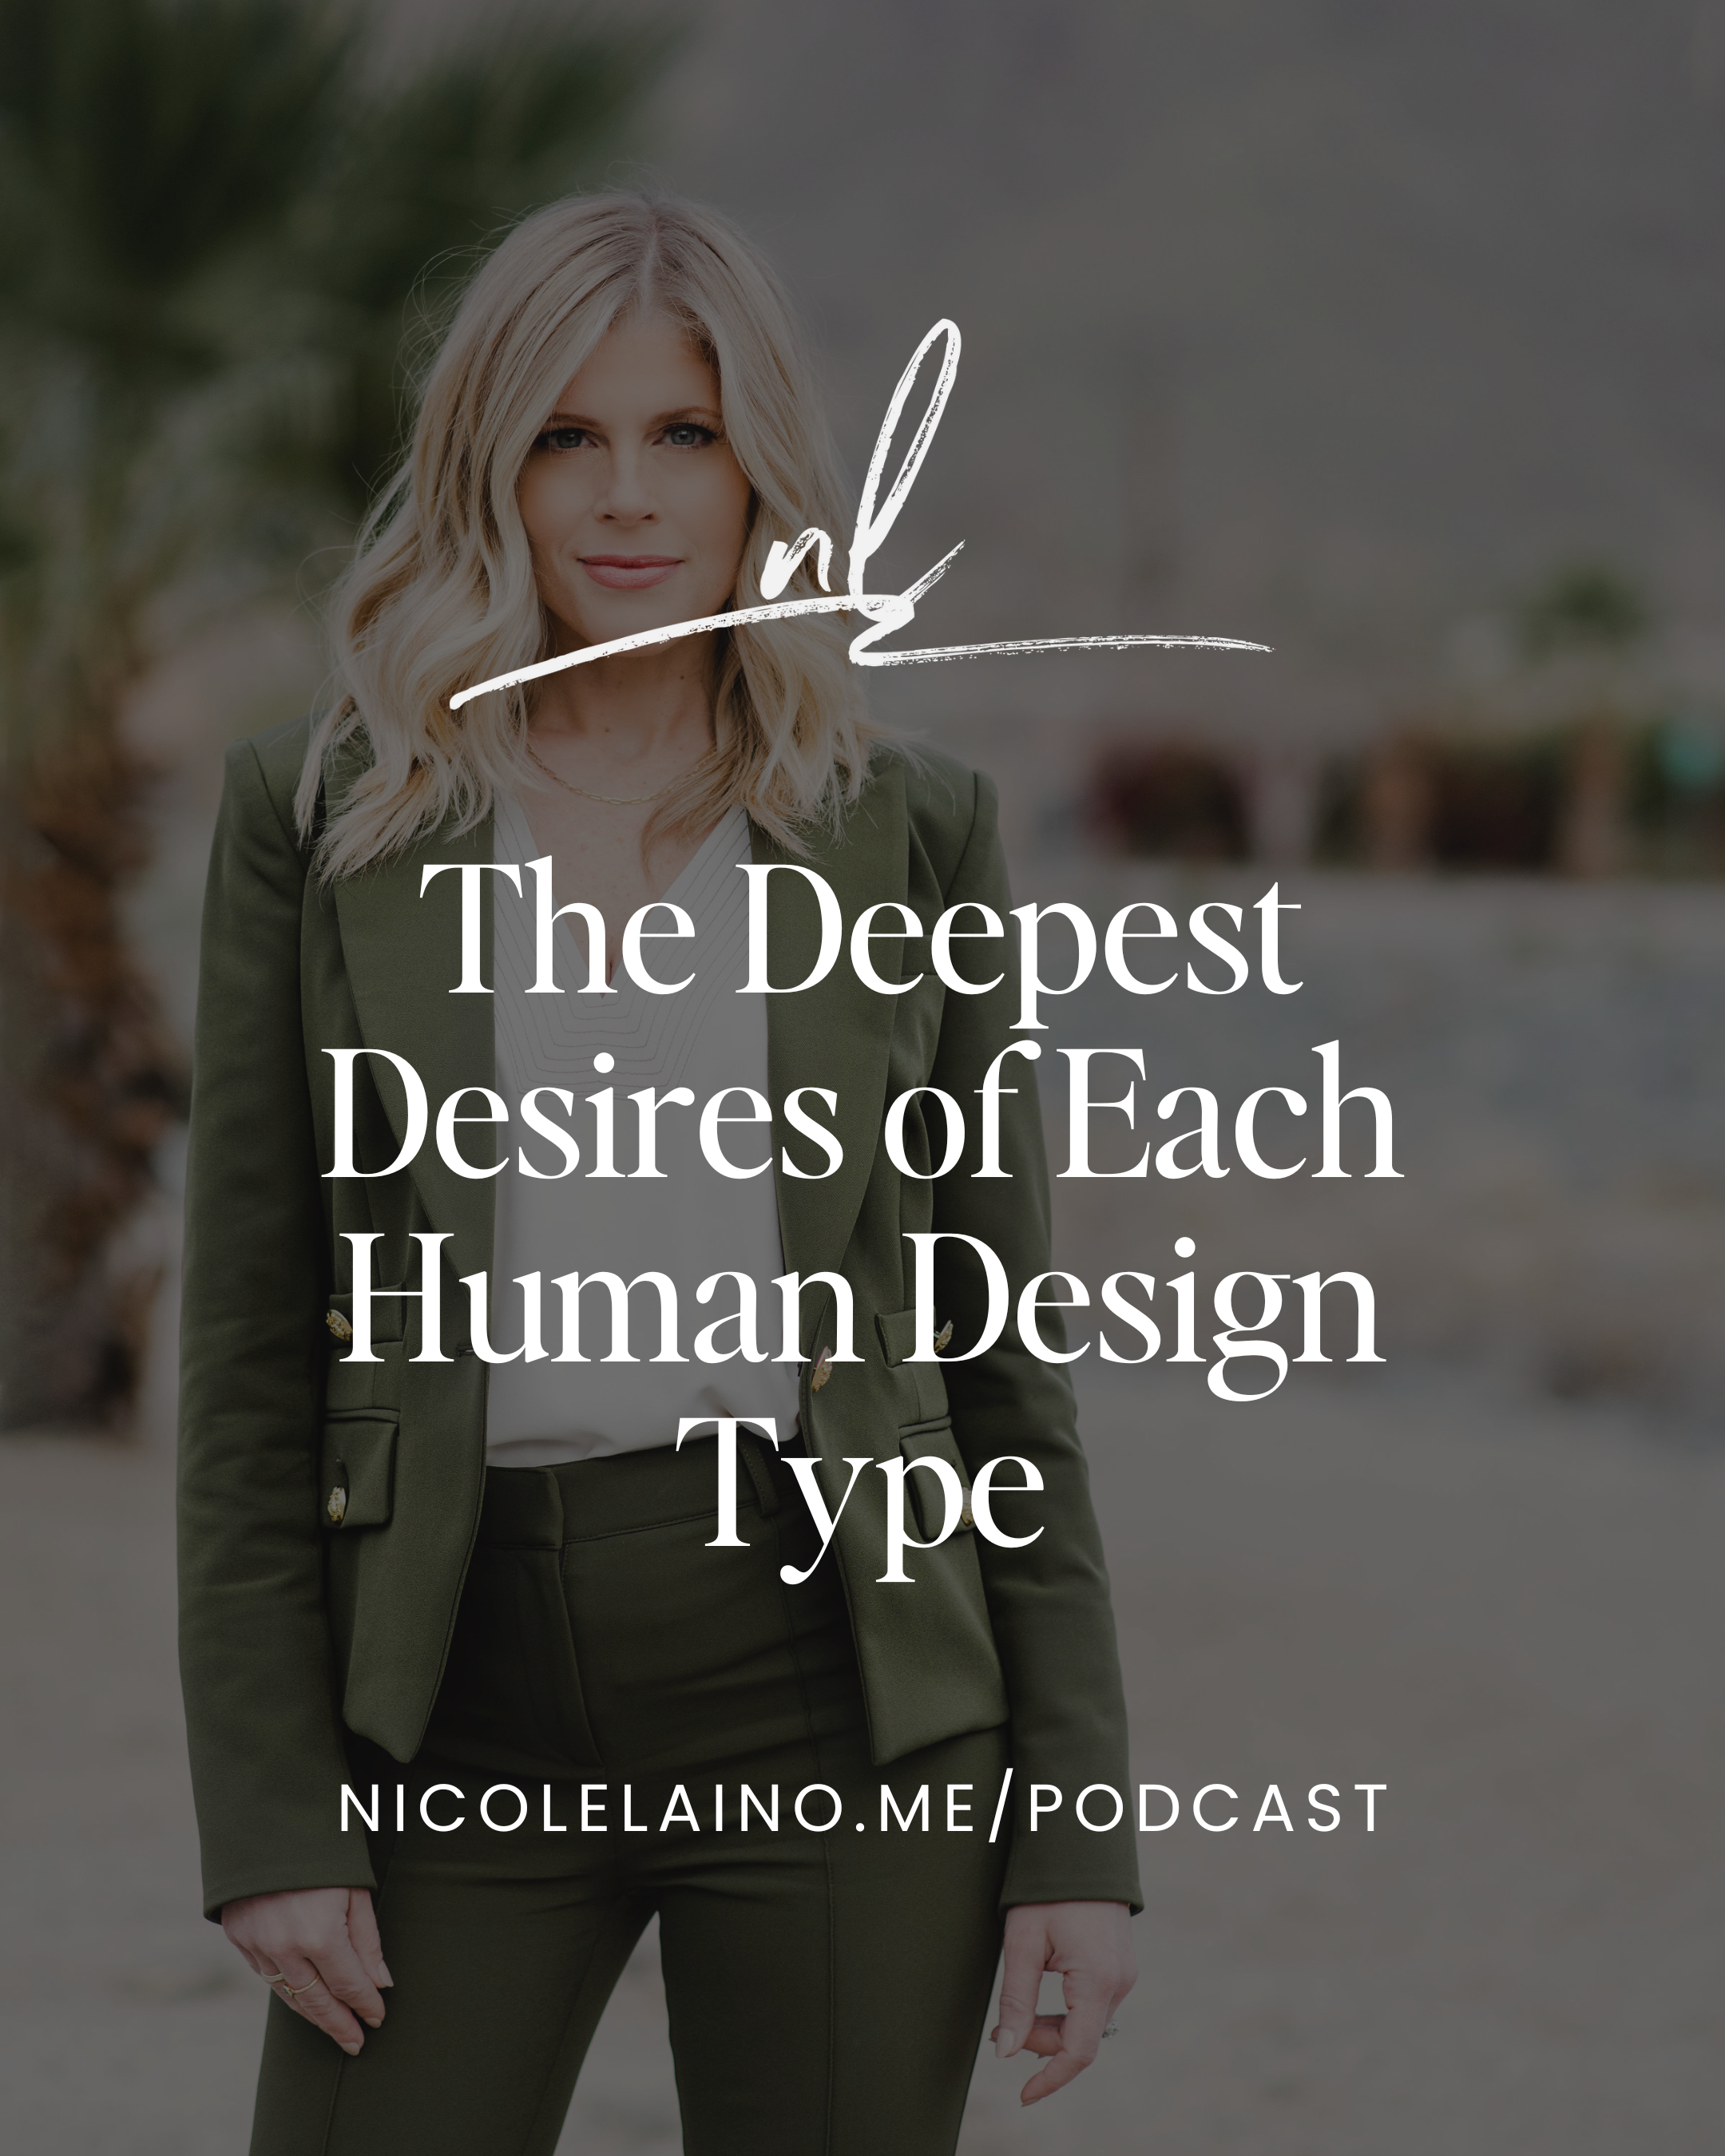 The Deepest Desires of Each Human Design Type